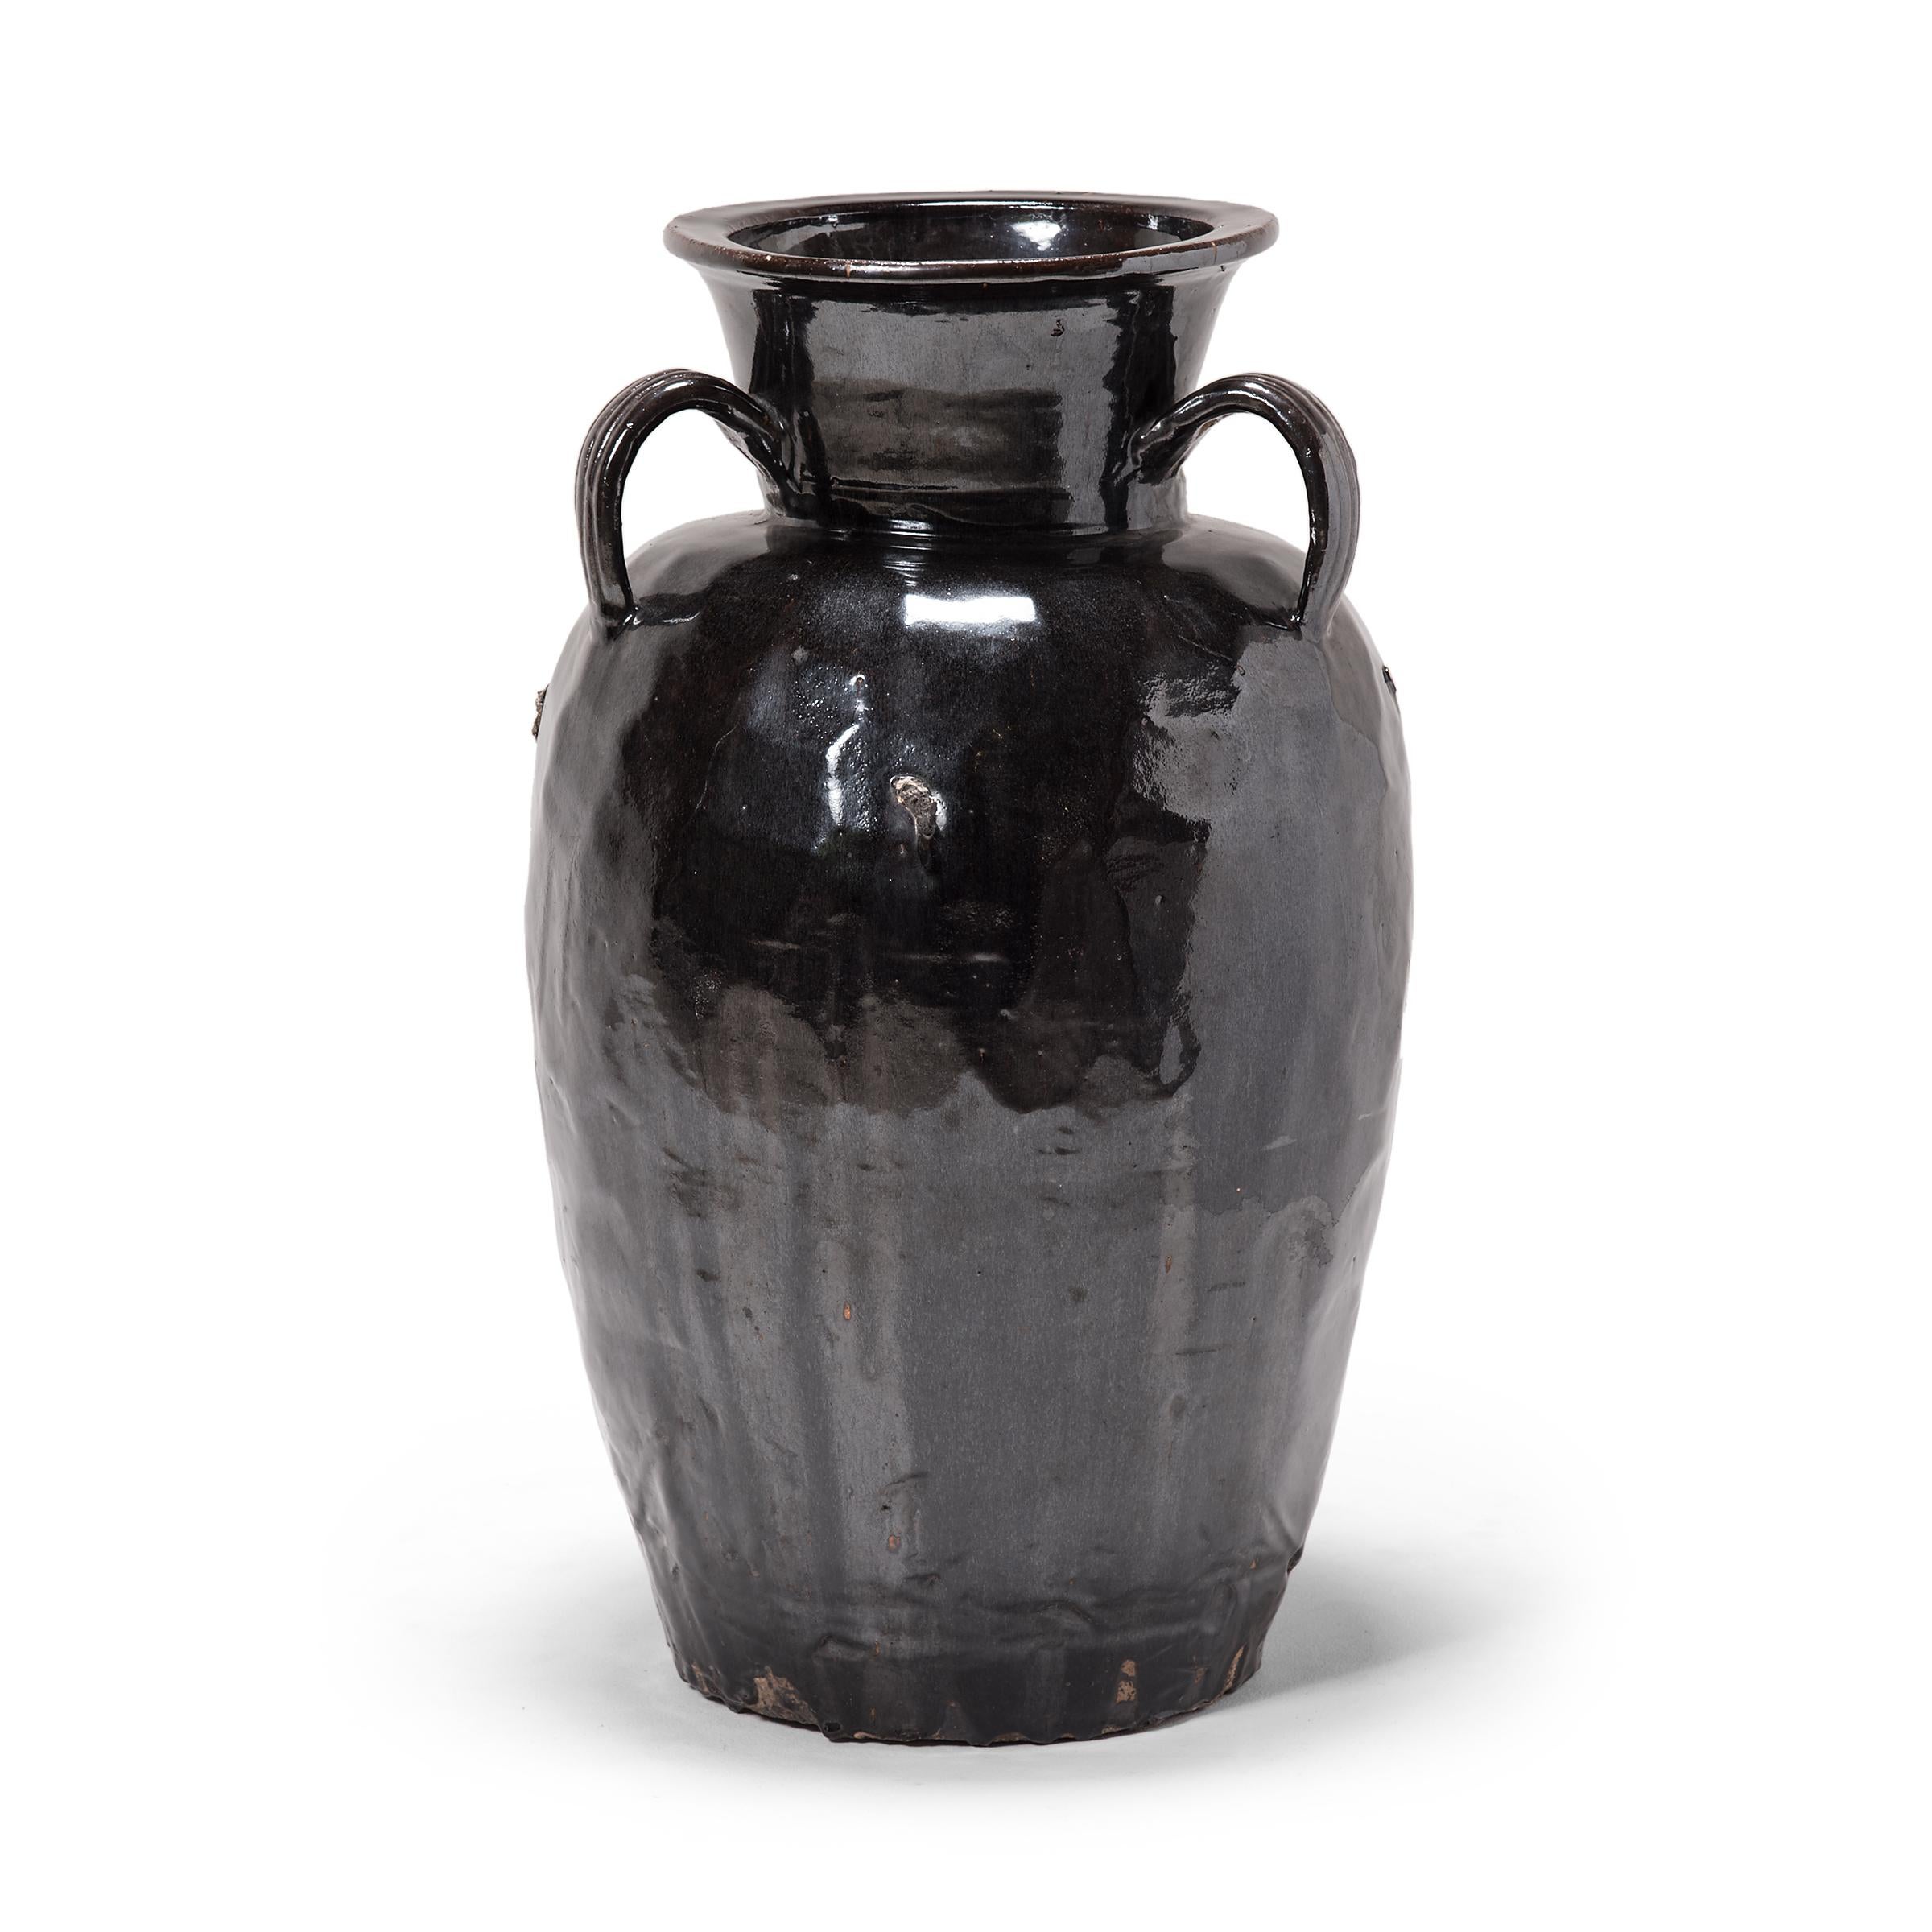 This monumental stoneware vessel was hand-formed in the early 20th century by an artisan in China's Shanxi province. The jar has a wide mouth with a rolled lip and three strap handles attached at the shoulders. A dark, glossy glaze sheets, pools,